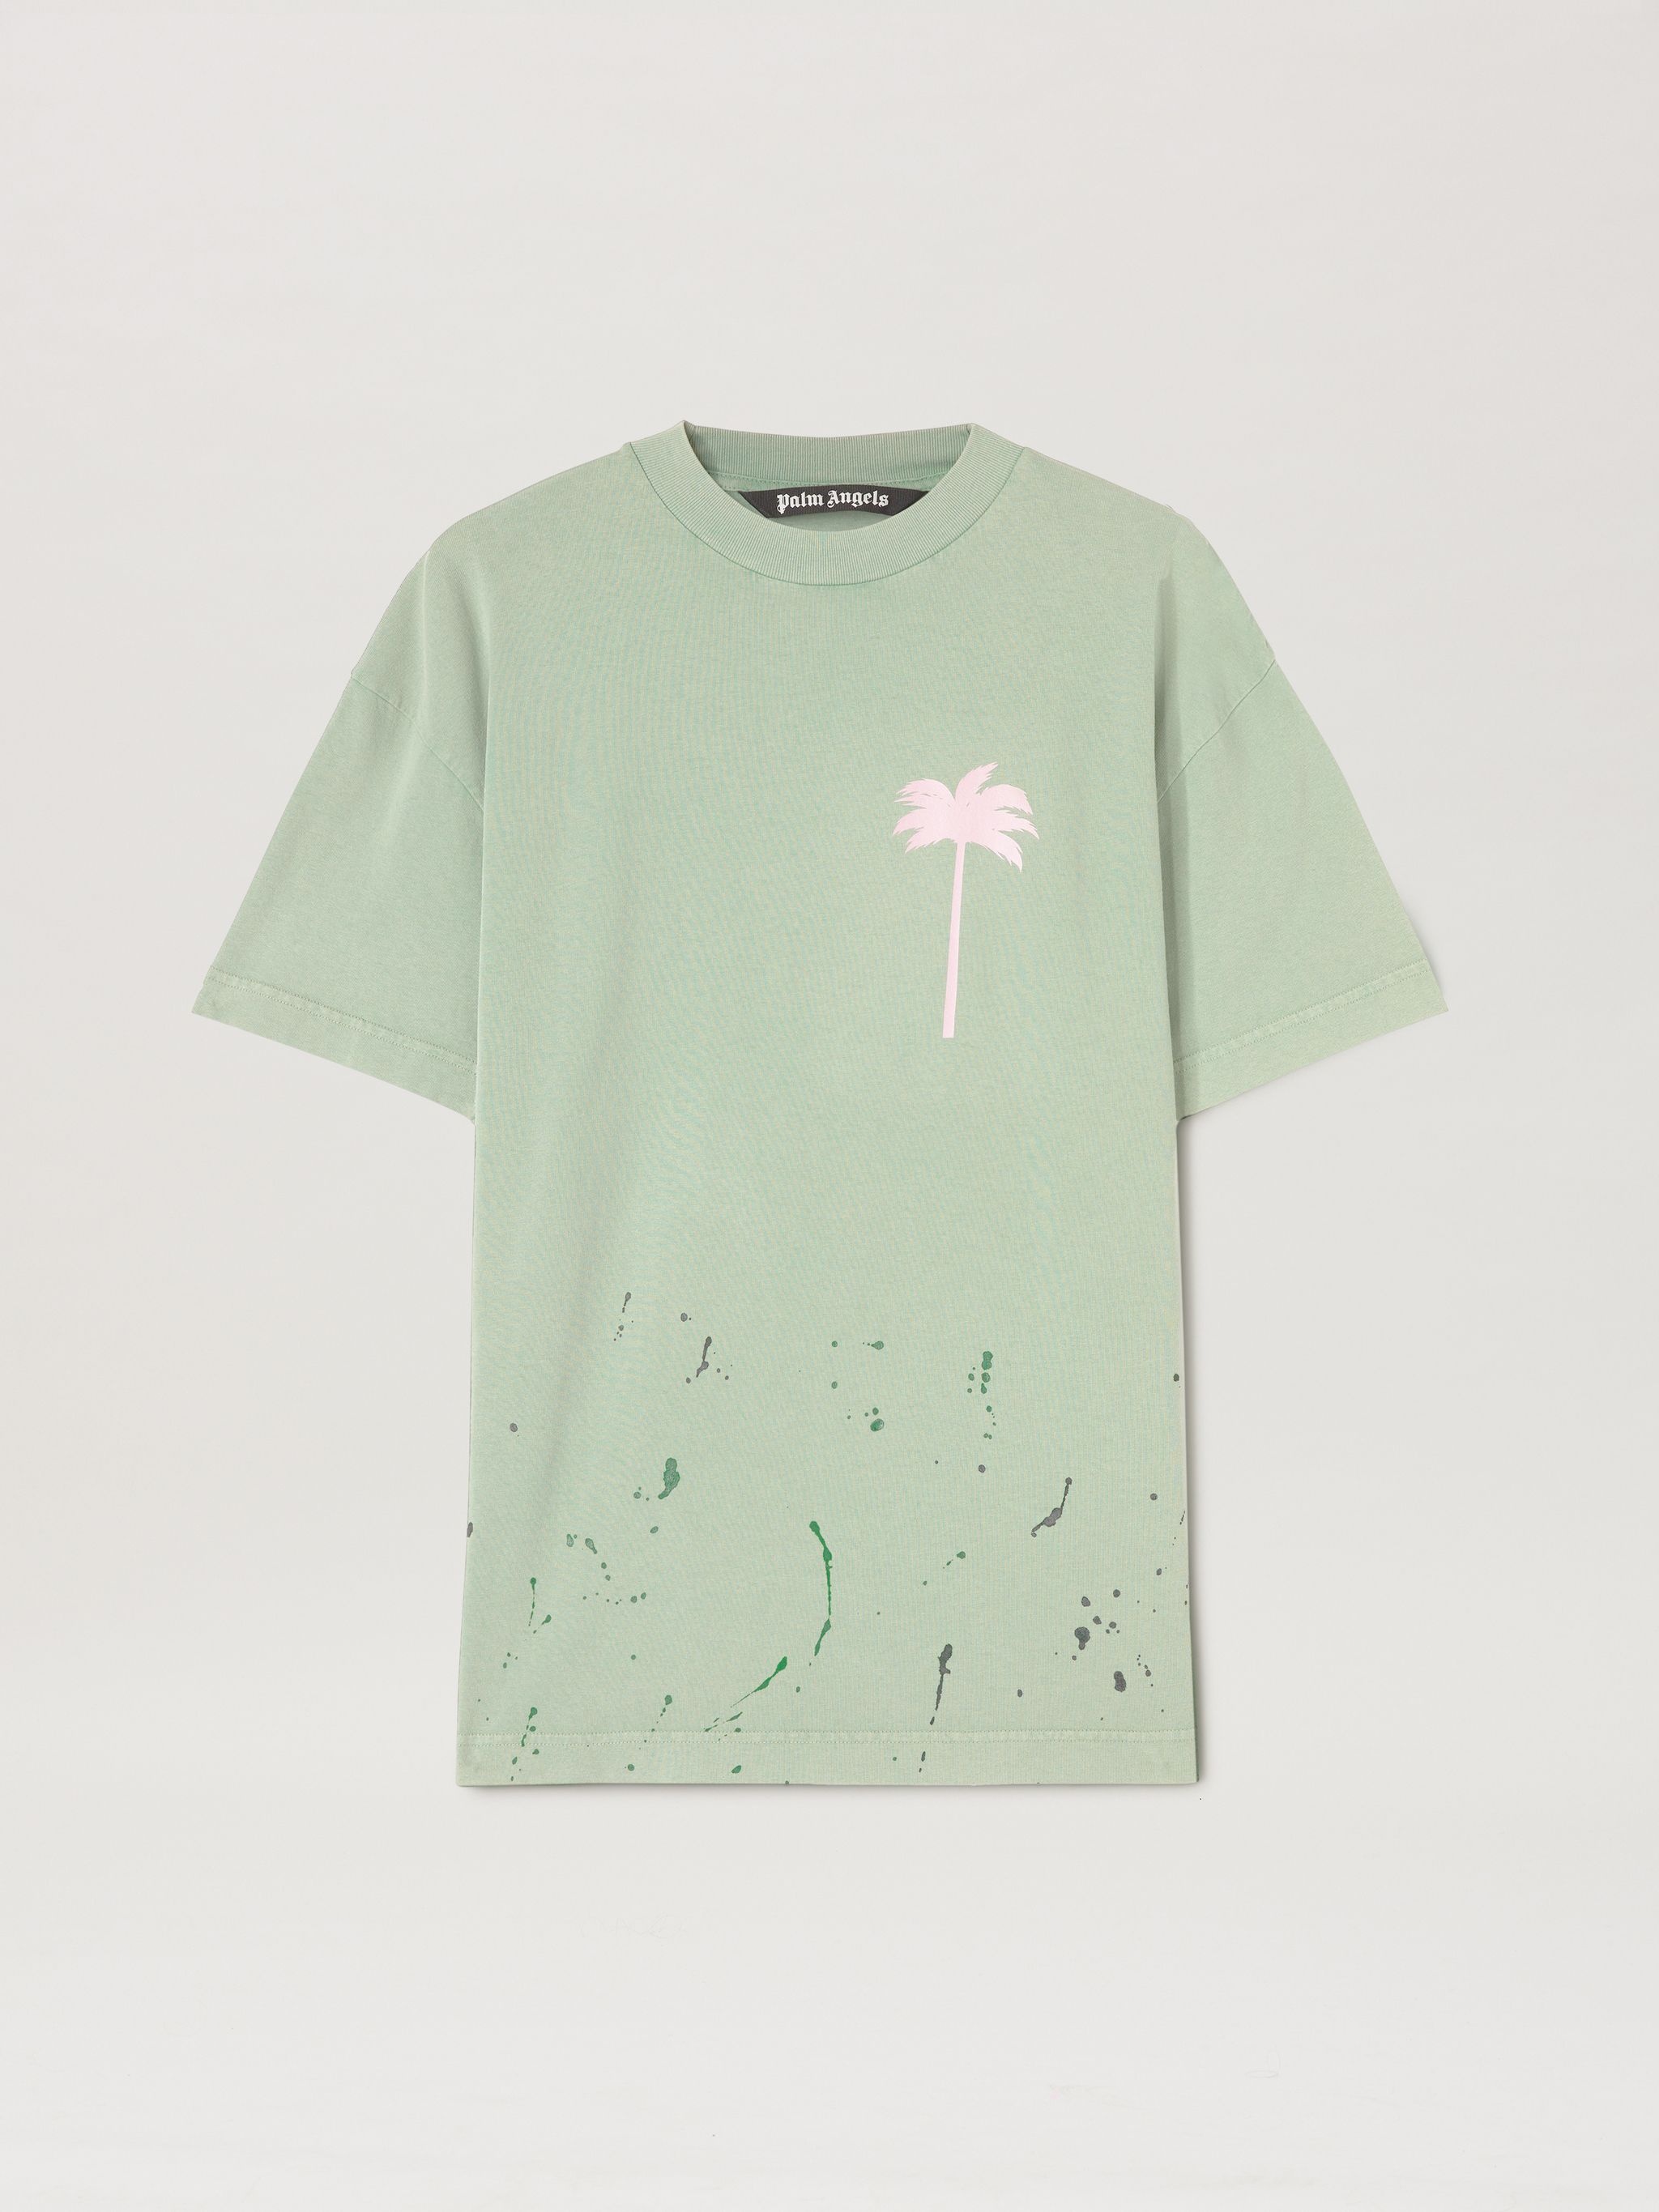 Palm Angels PxP Painted Classic Tee | REVERSIBLE